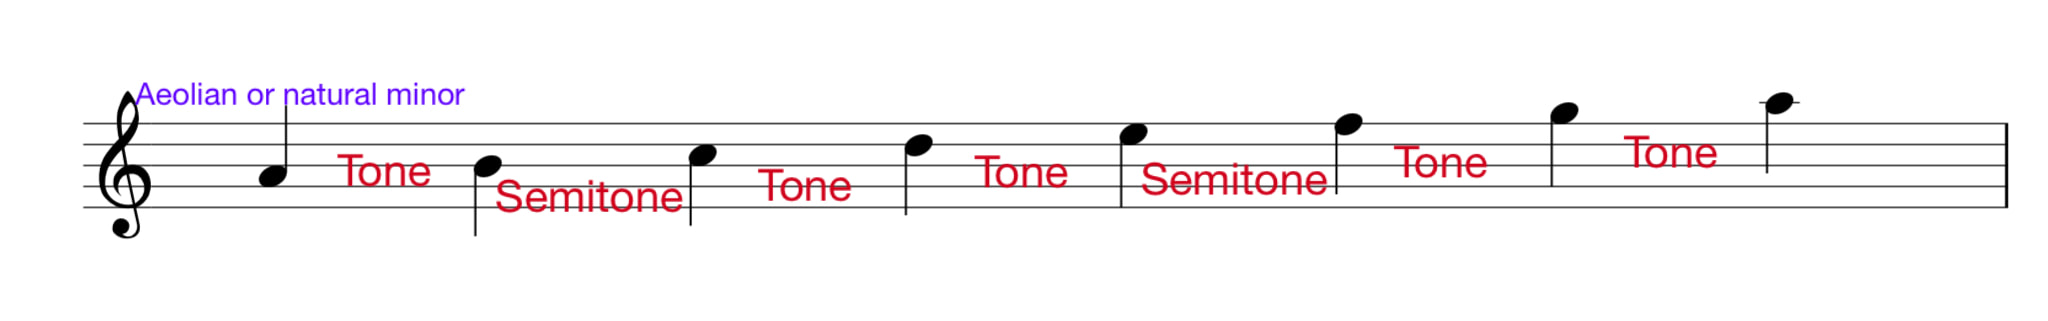 Aeolian or natural minor scale